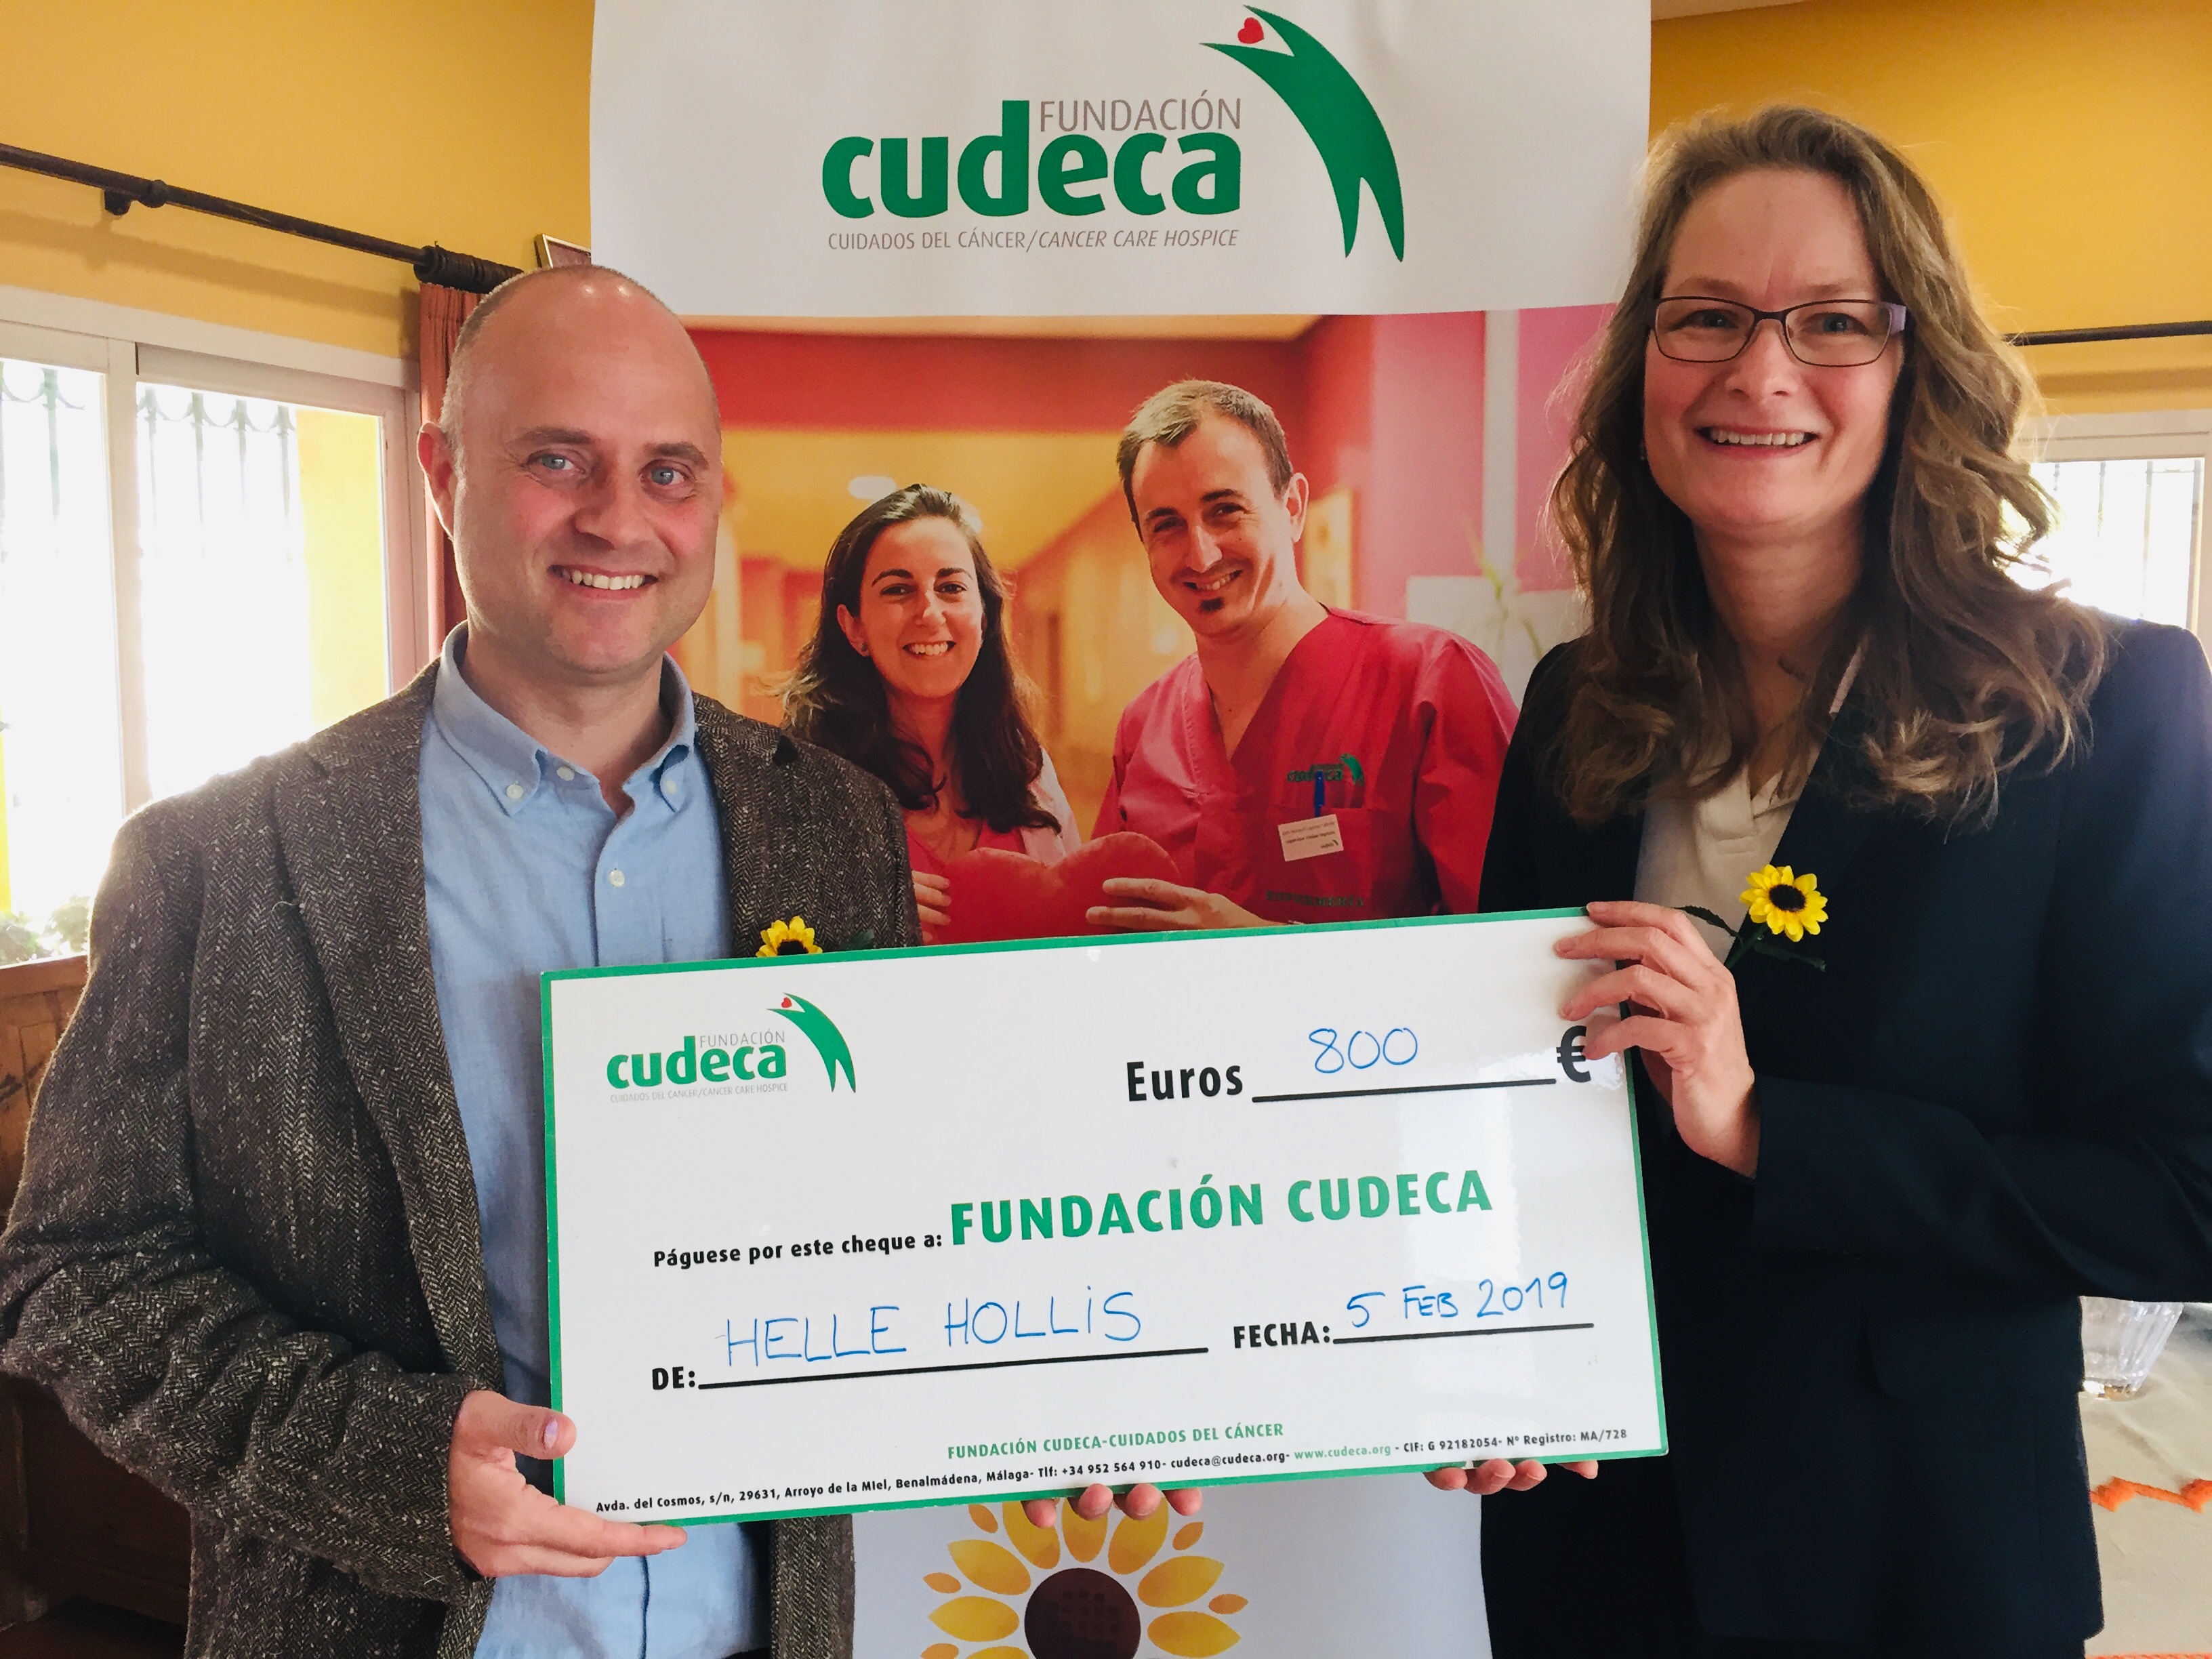 Helle Hollis presents cheque donation after 9 years helping CUDECA!